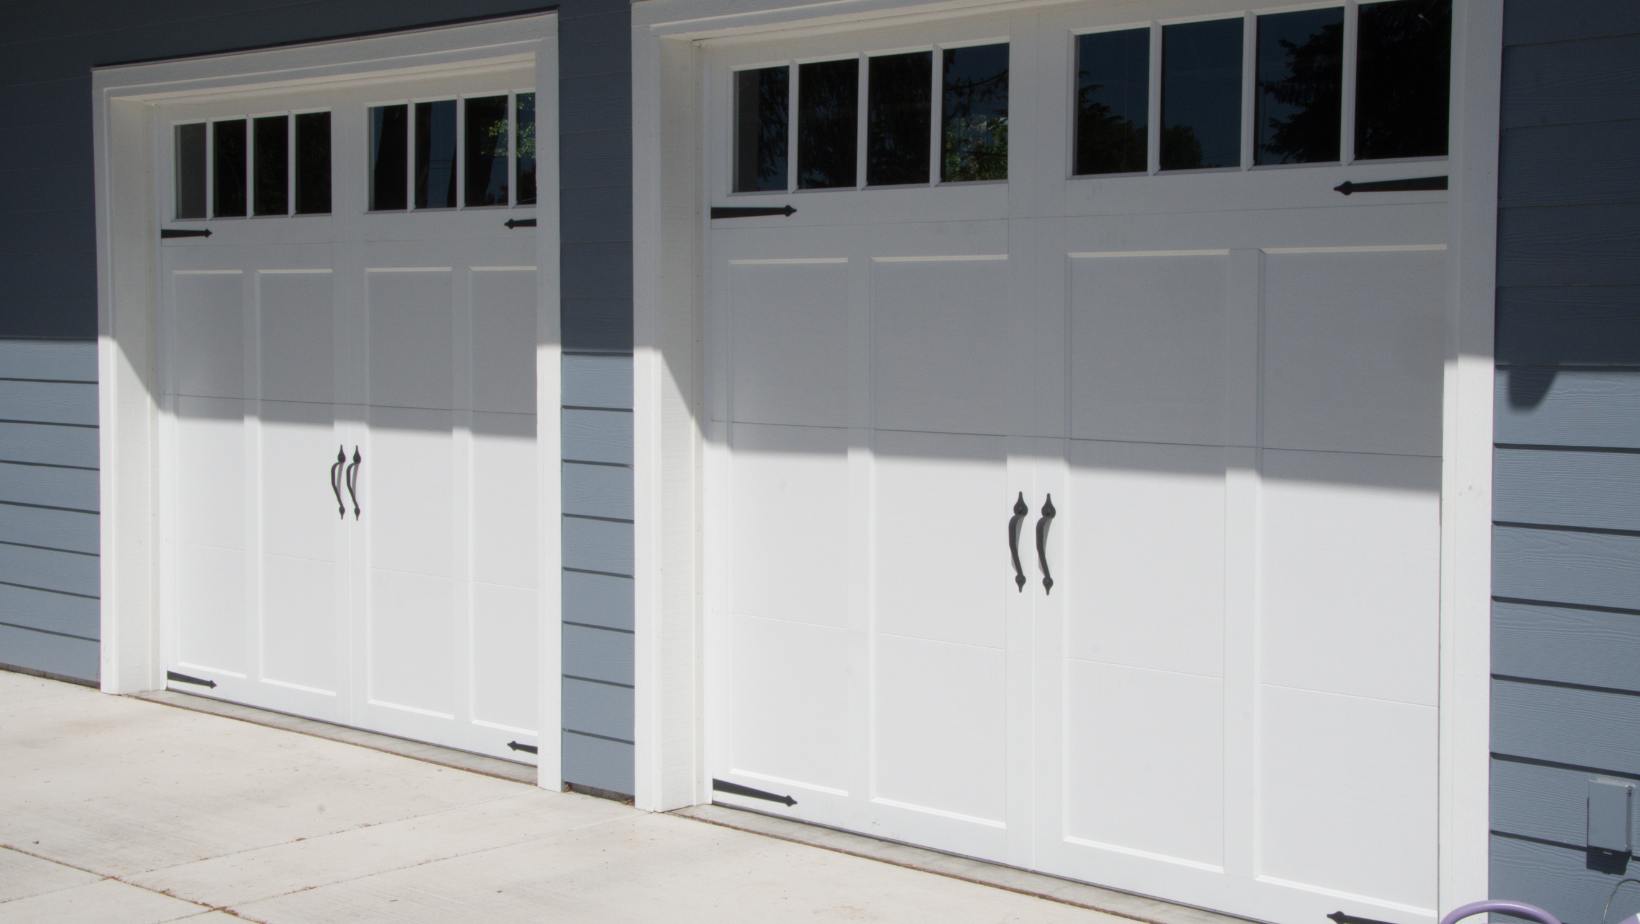 How To Choose A Garage Door For Your Home?